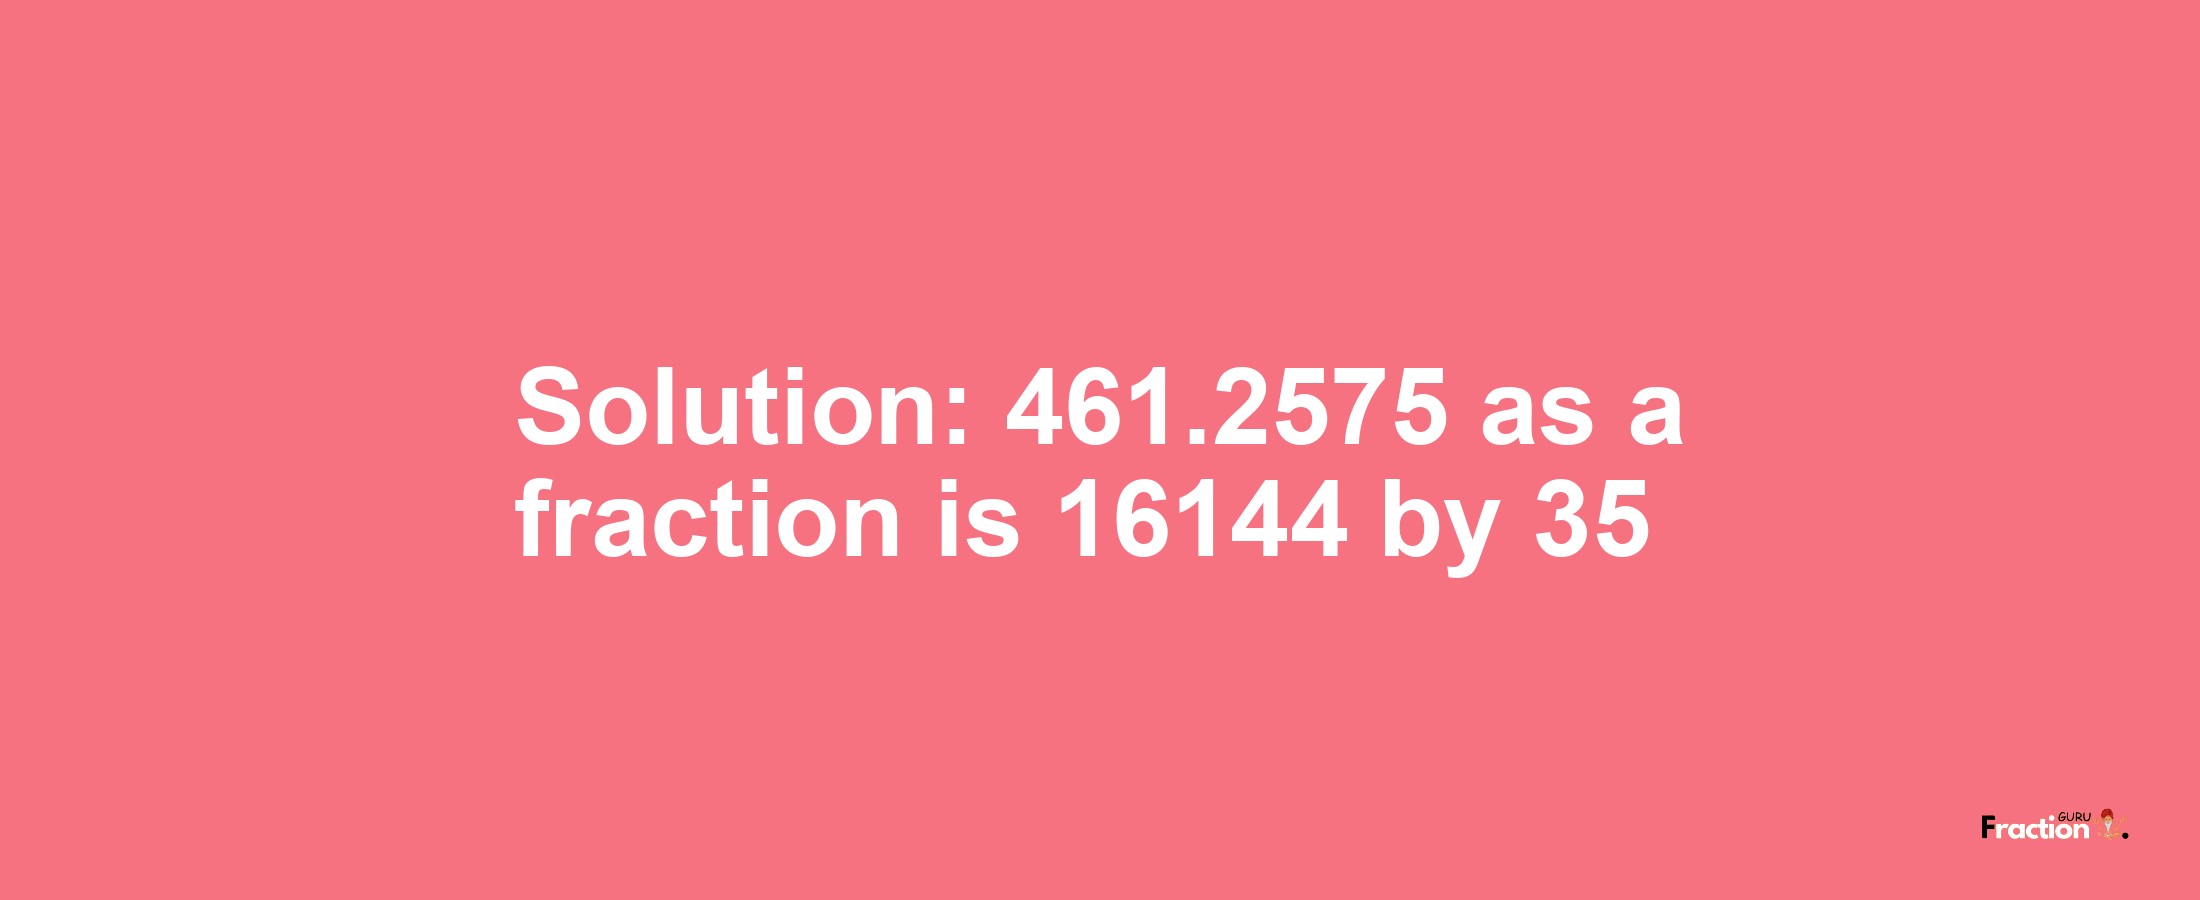 Solution:461.2575 as a fraction is 16144/35